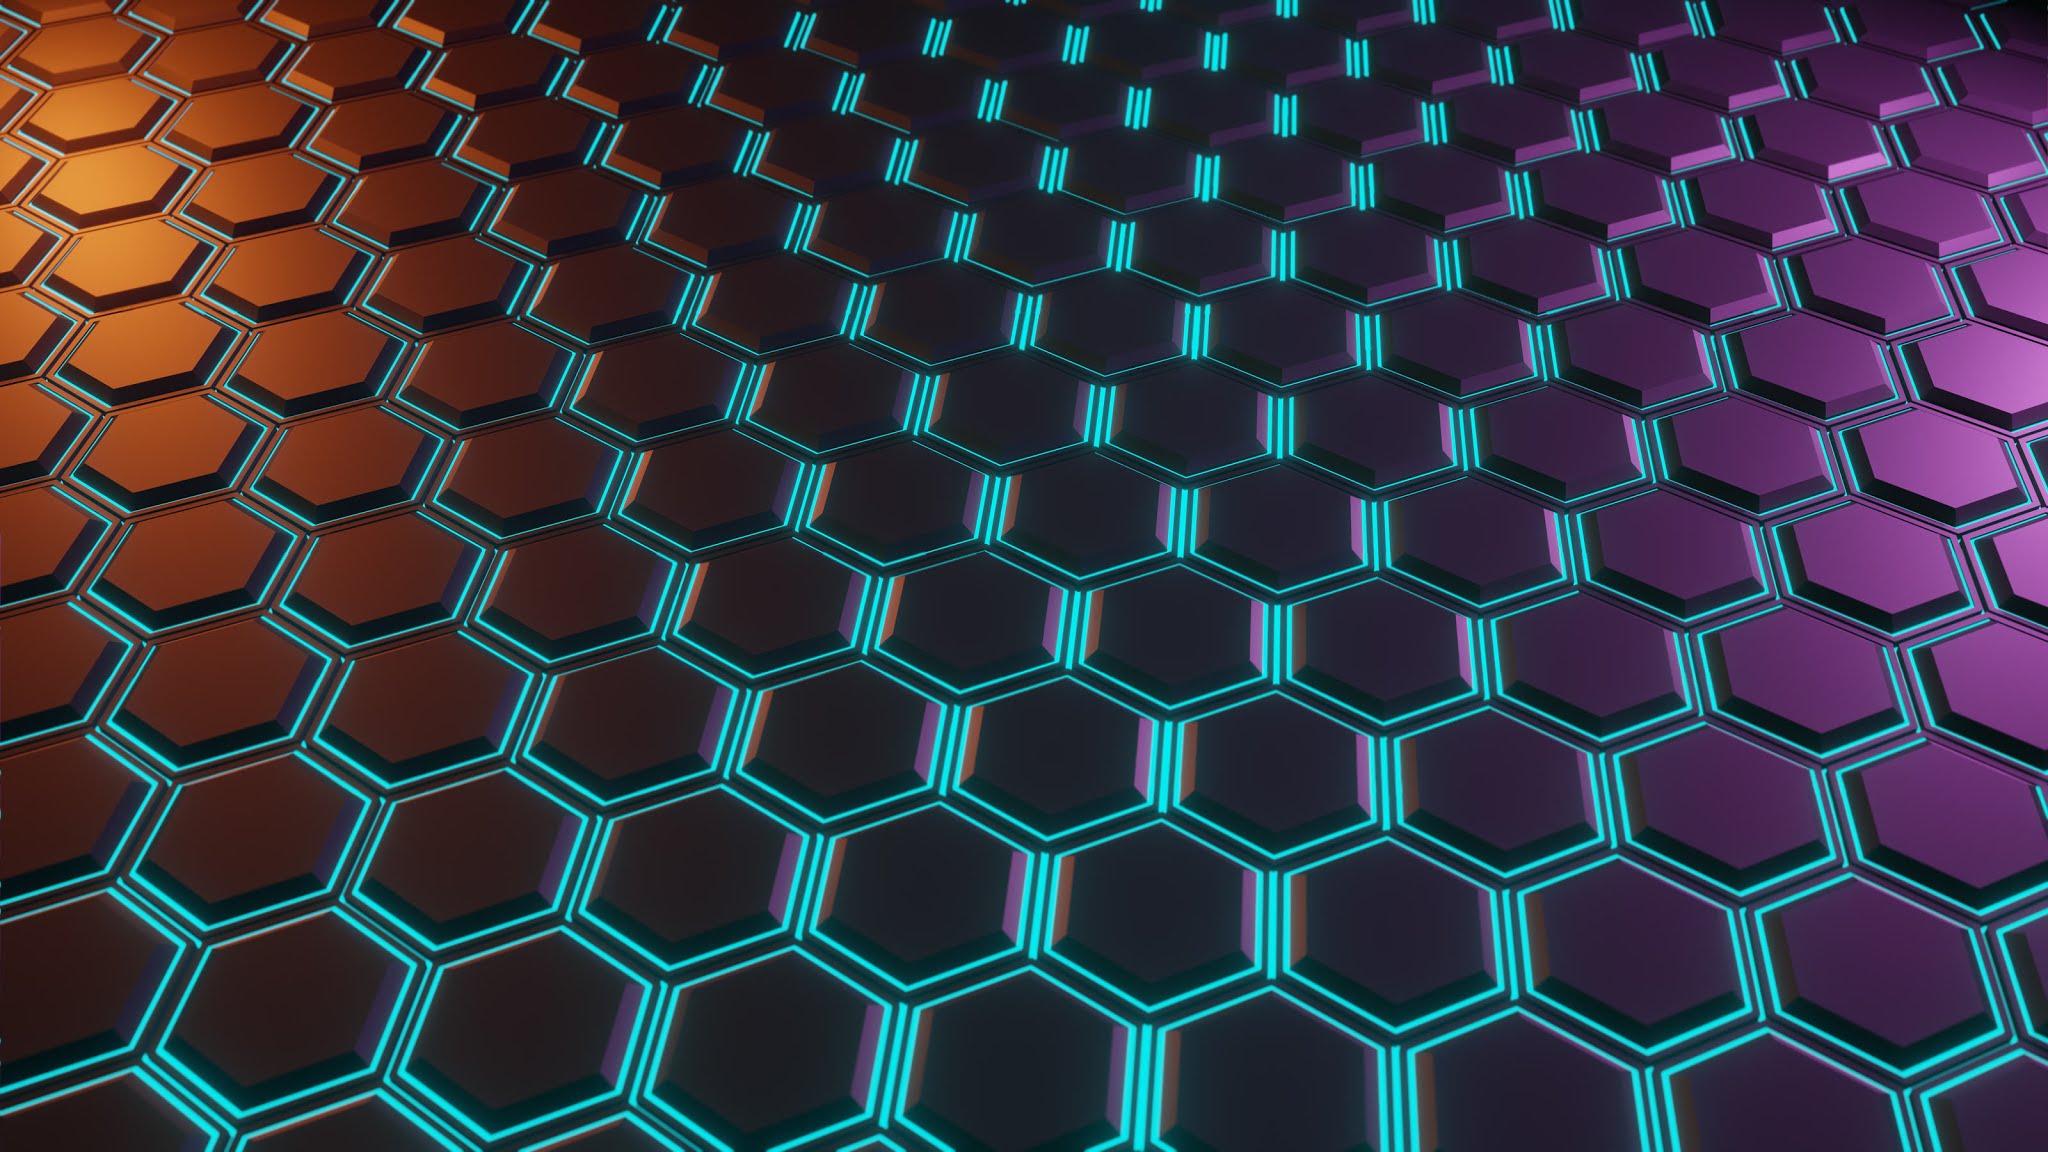 Wallpaper Abstract, Hexagon, Pattern, Polygon - XFXWallpapers